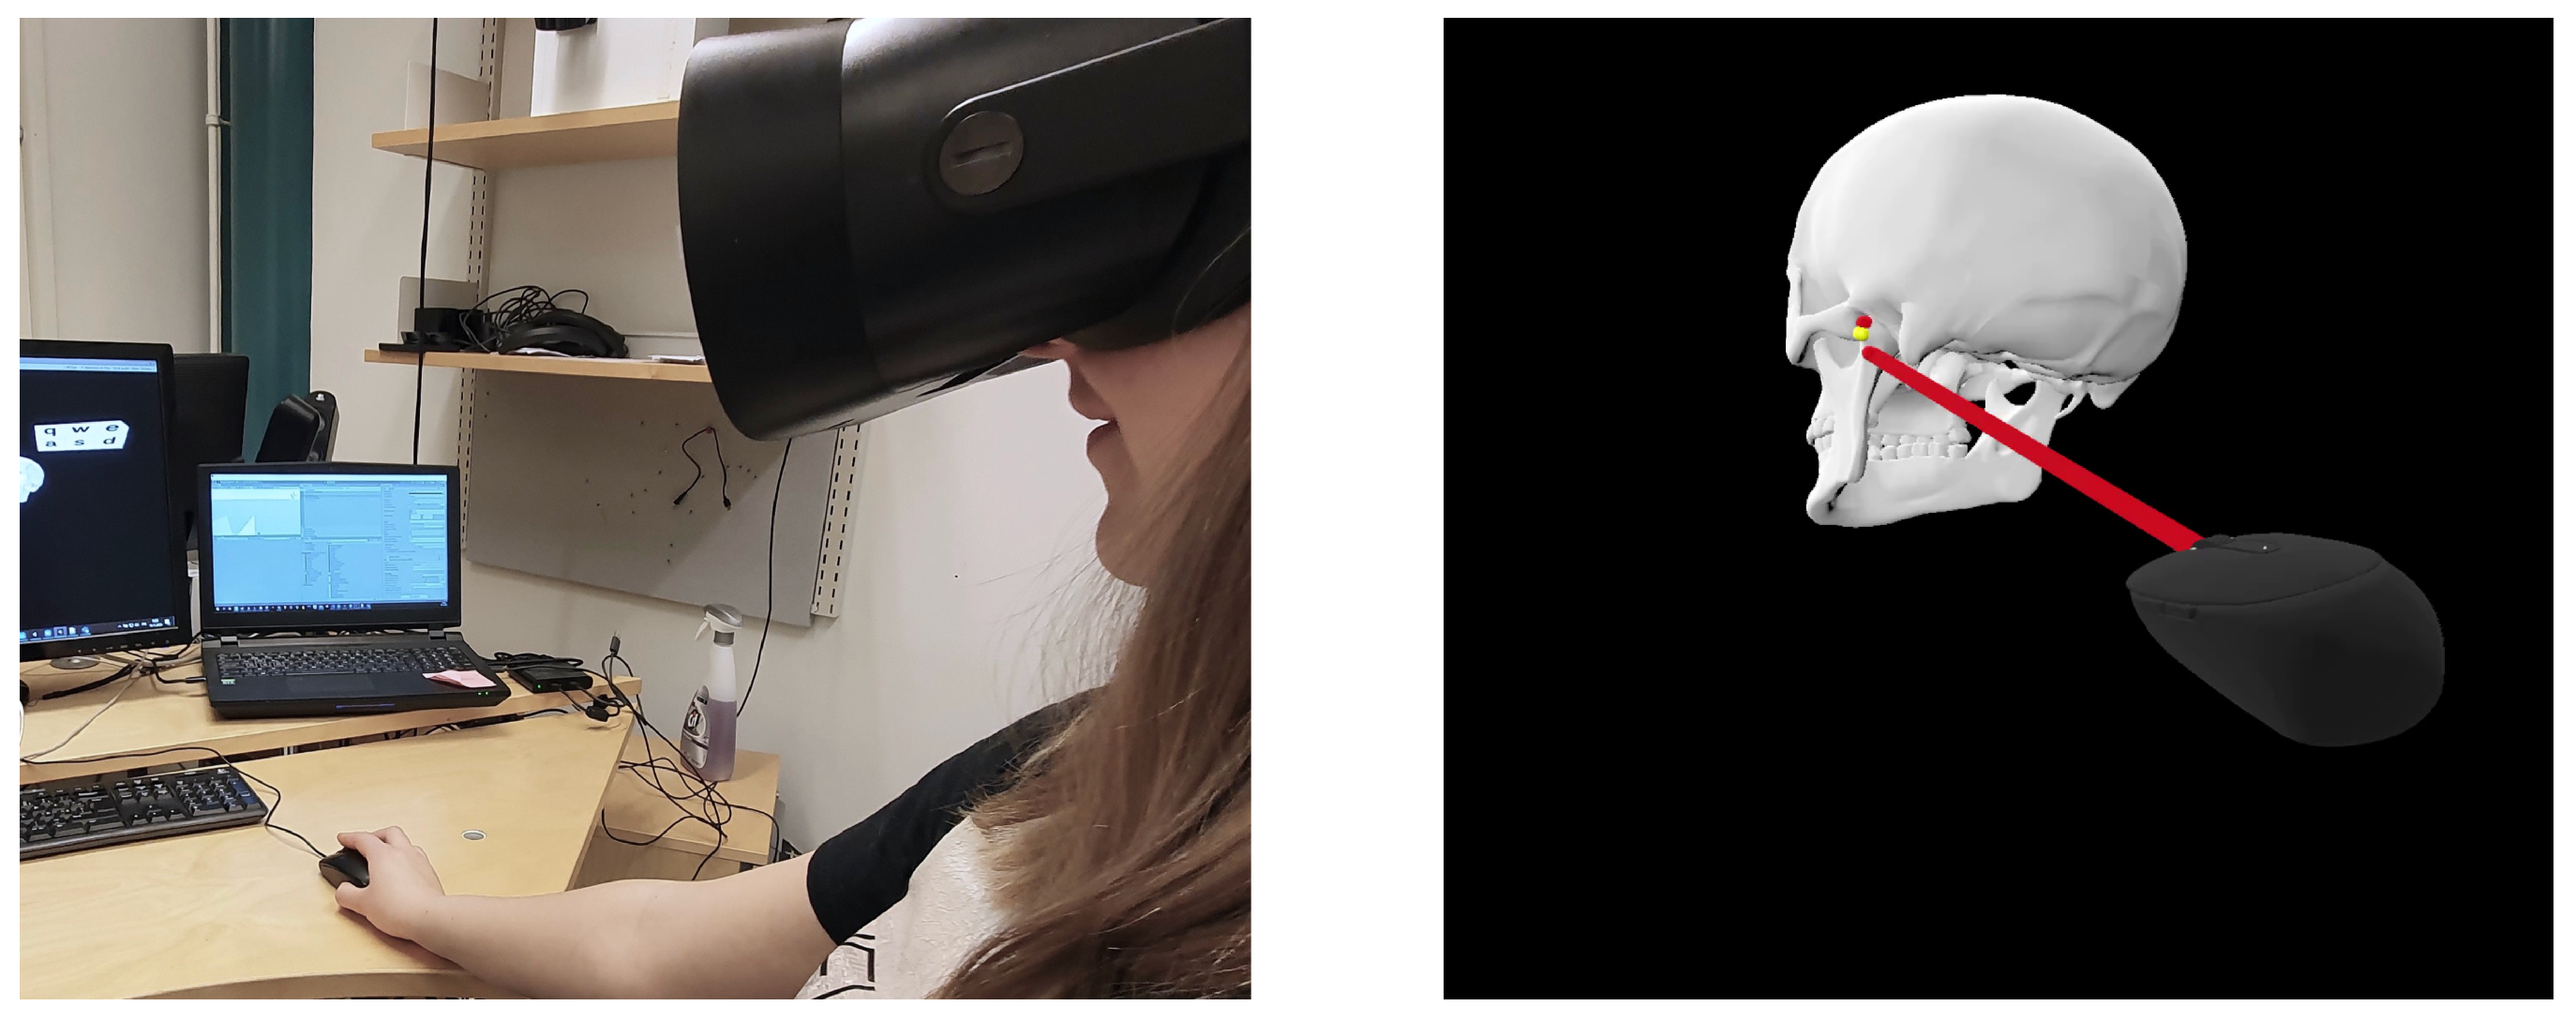 VR Goggles for Mice Enhance Behavioral Research